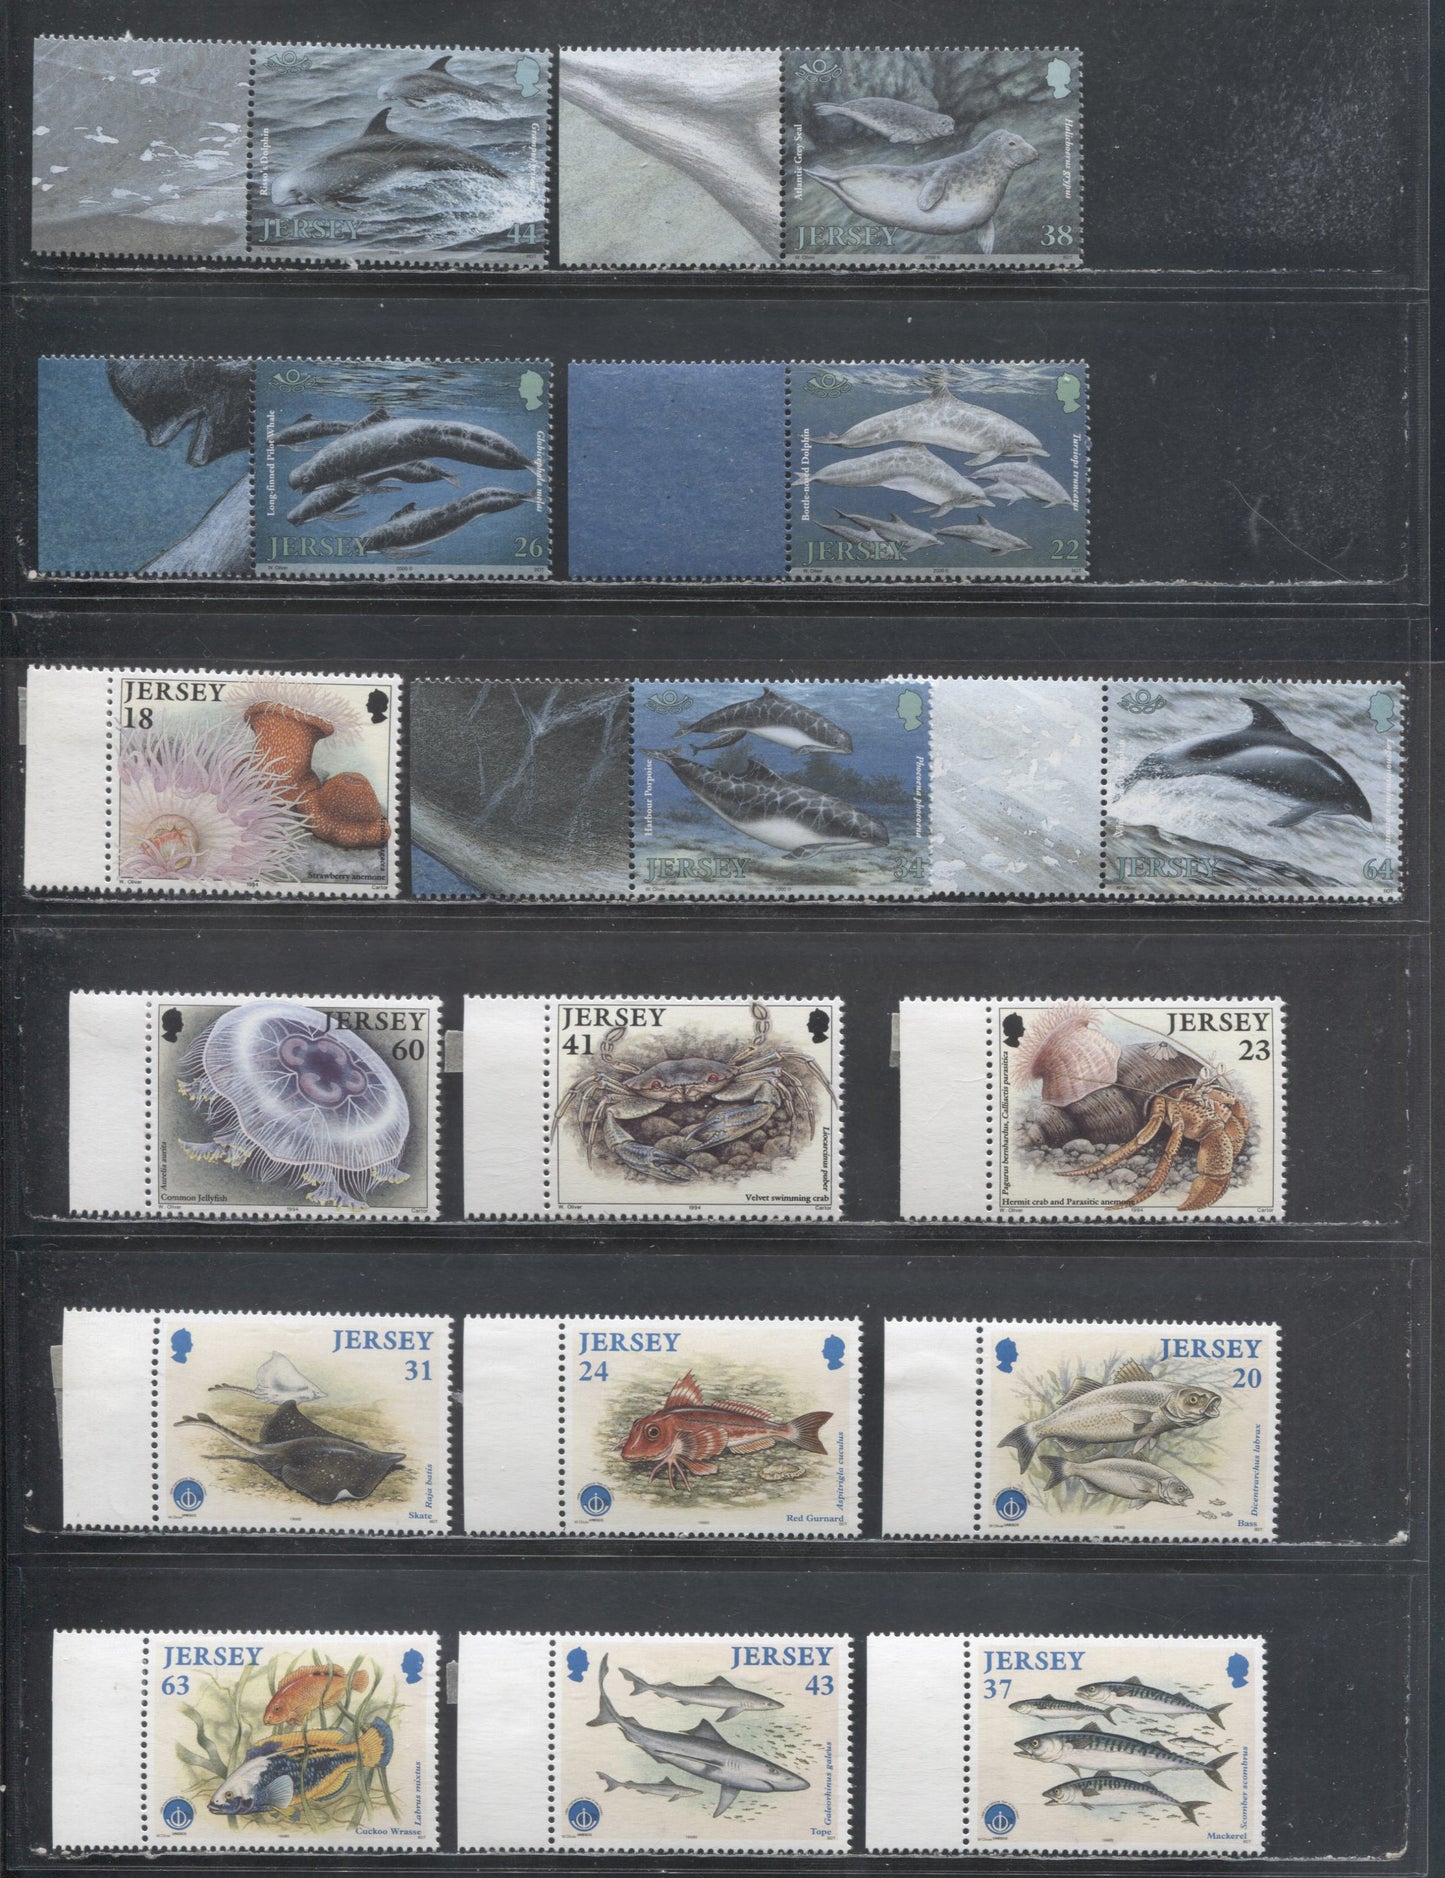 Lot 38 Jersey SC#681/957 1994-2000 Marine Life - Marine Mammals Issues, 17 VFOG/NH Singles & Souvenir Sheet, Click on Listing to See ALL Pictures, 2017 Scott Cat. $23.15